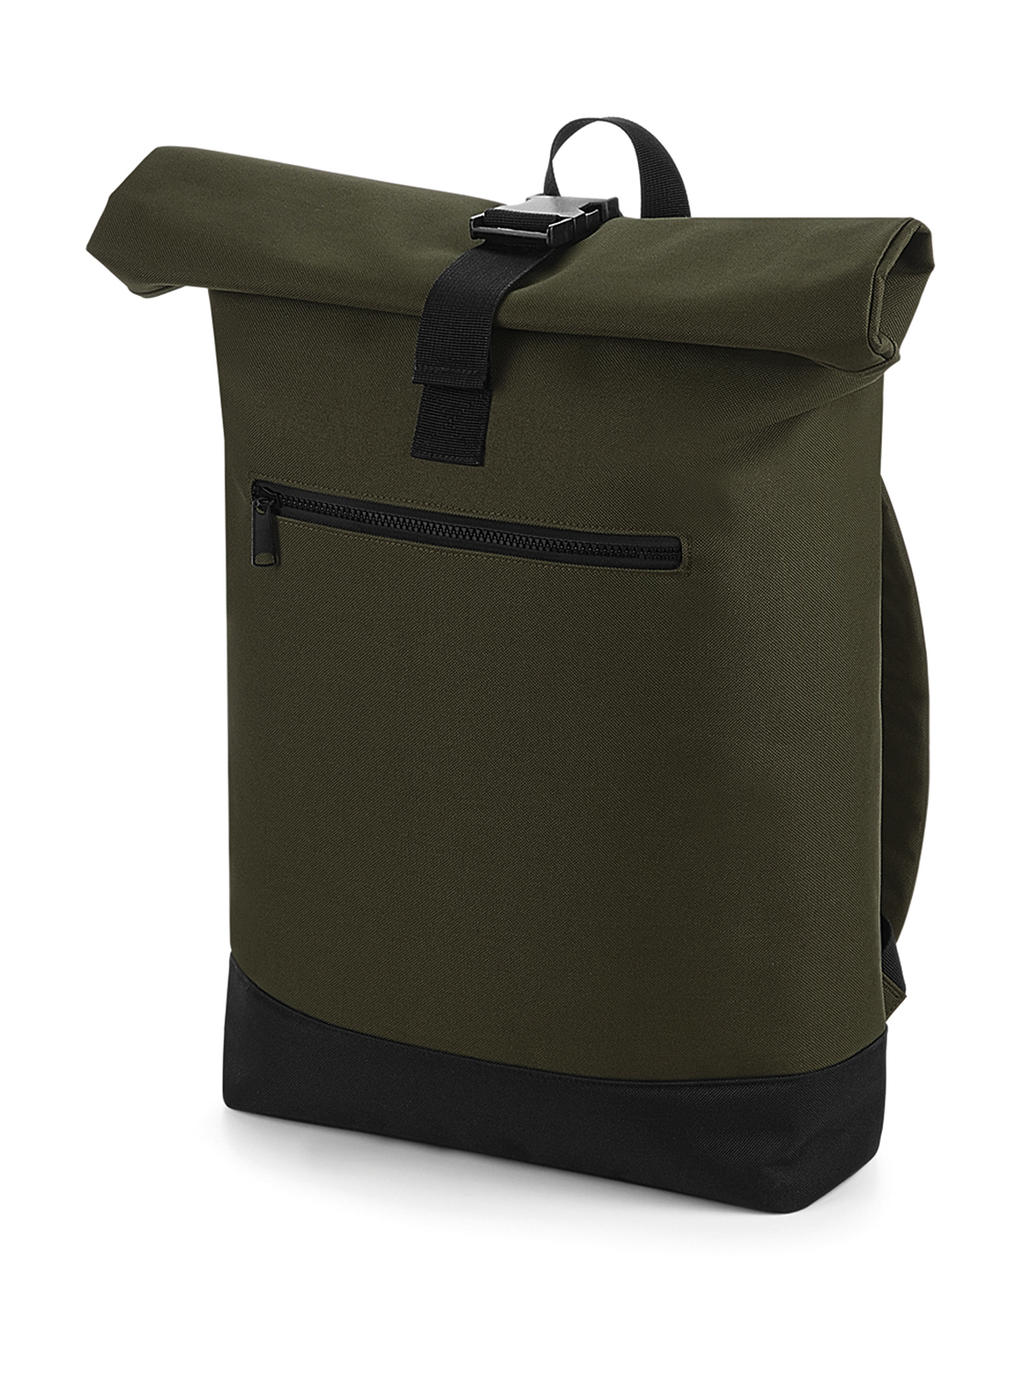  Roll-Top Backpack in Farbe Military Green